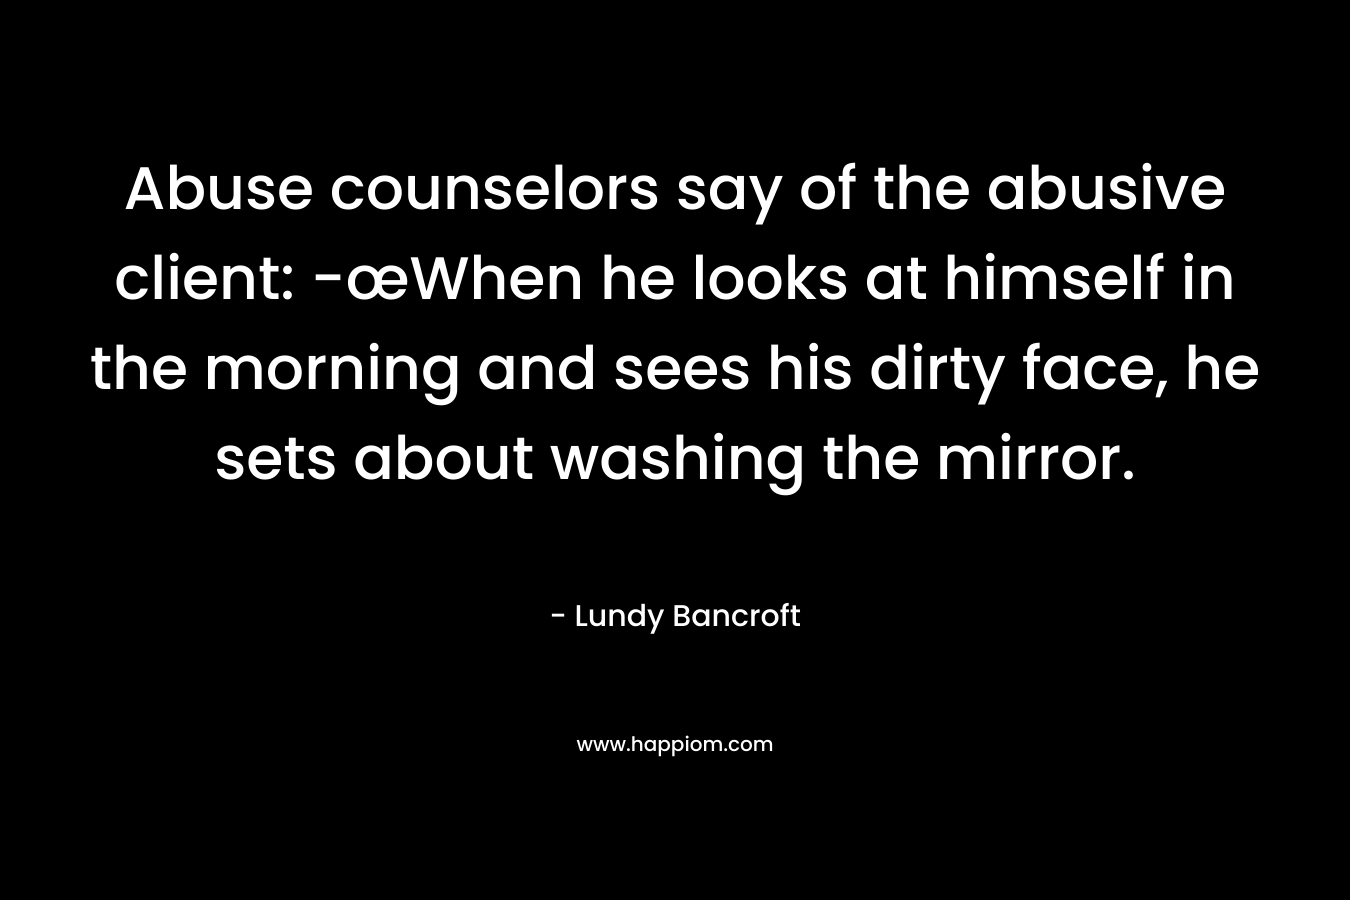 Abuse counselors say of the abusive client: -œWhen he looks at himself in the morning and sees his dirty face, he sets about washing the mirror.